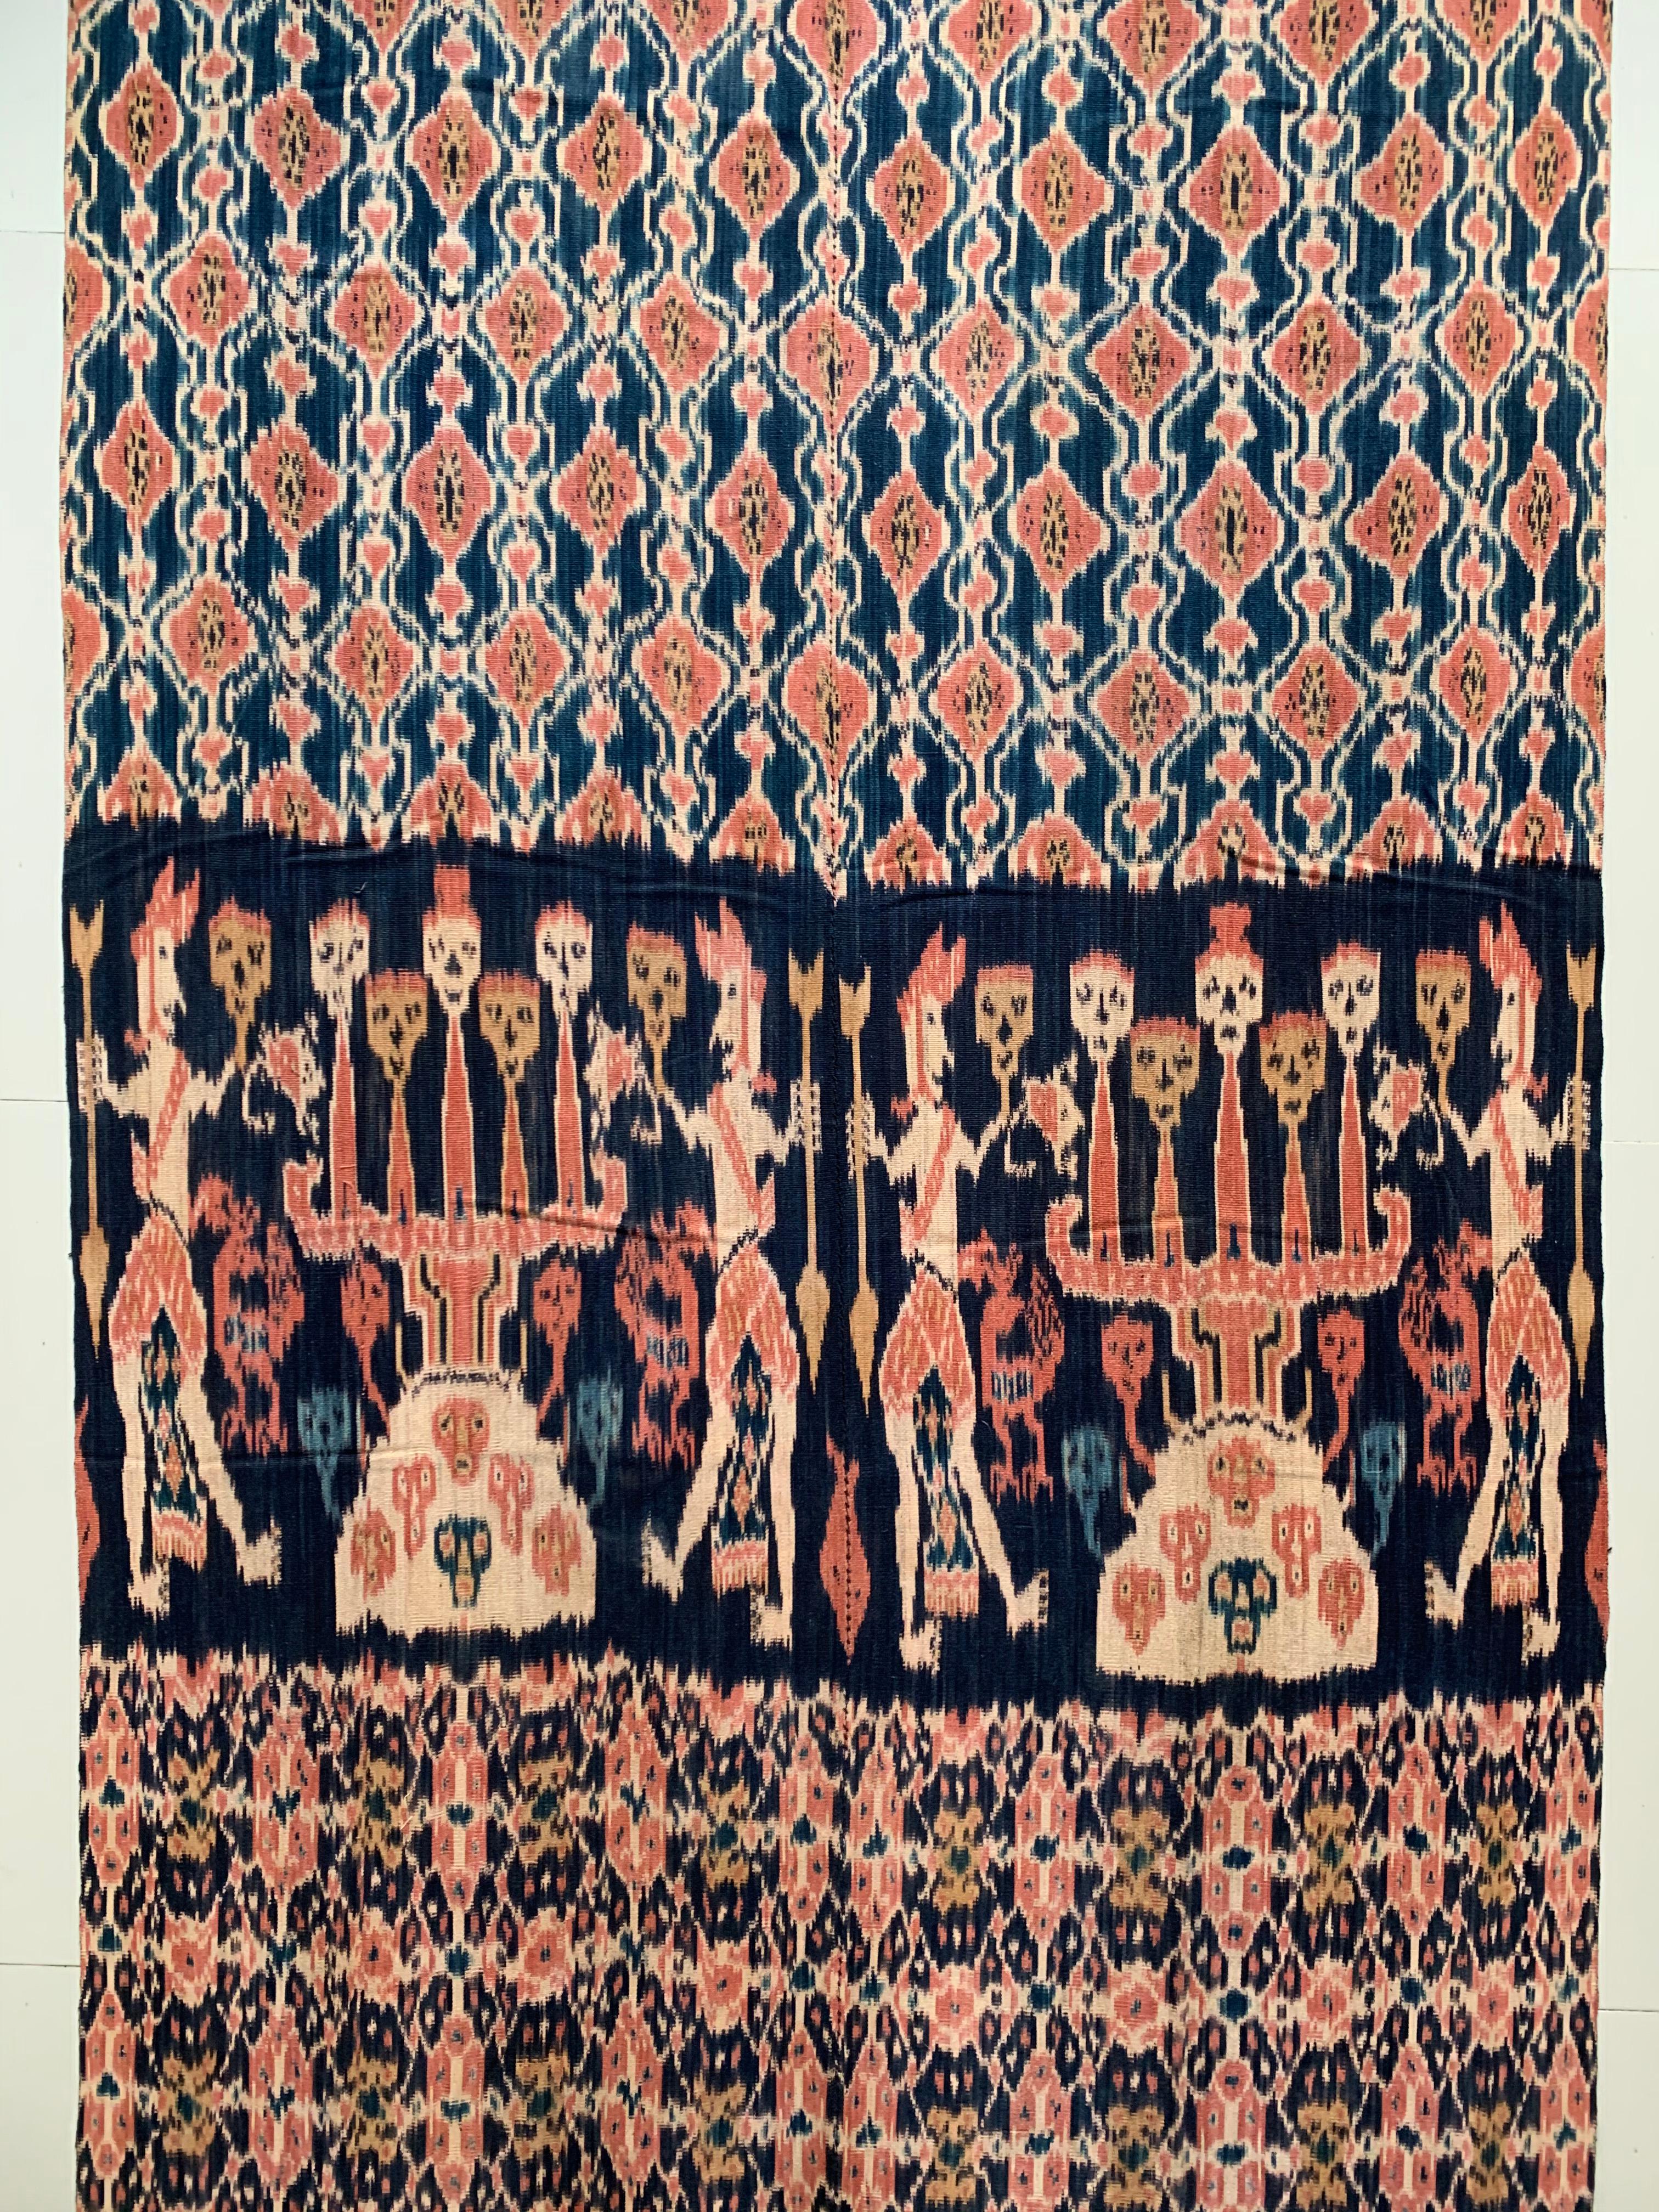 Other Very Large Ikat Textile from Sumba Island with Stunning Tribal Motifs, Indonesia